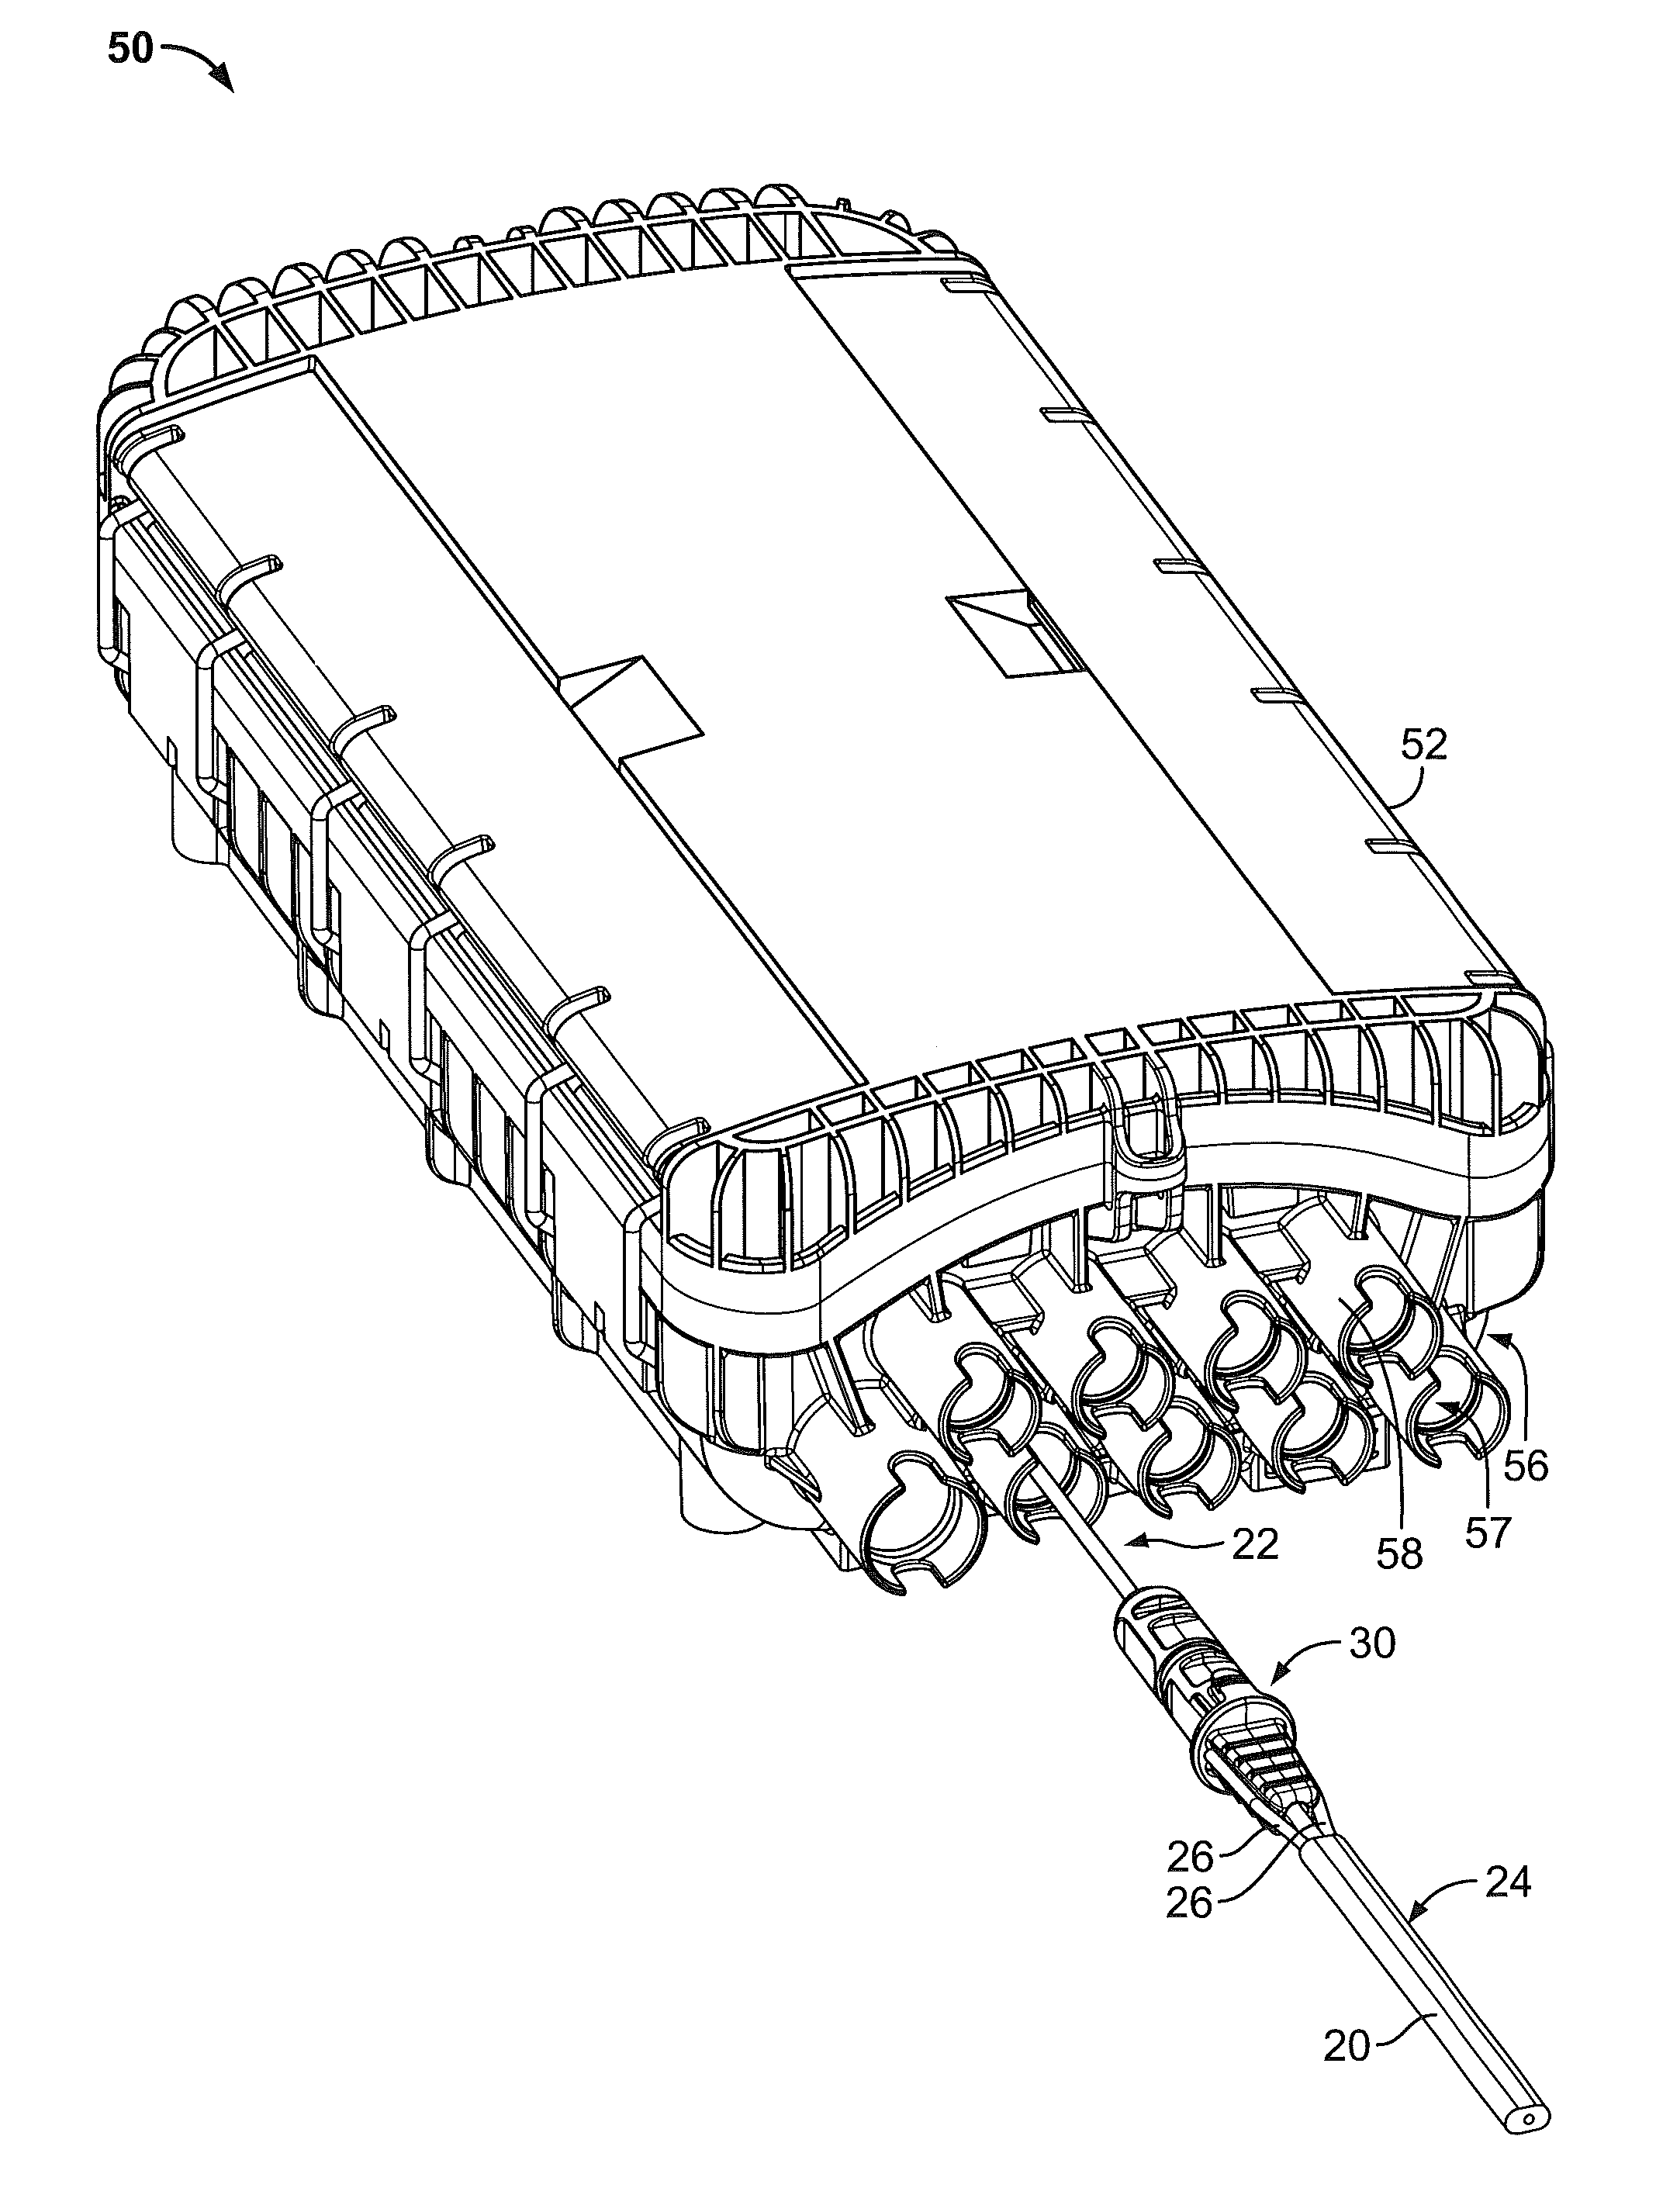 Cable enclosure systems, plugs and methods for using the same